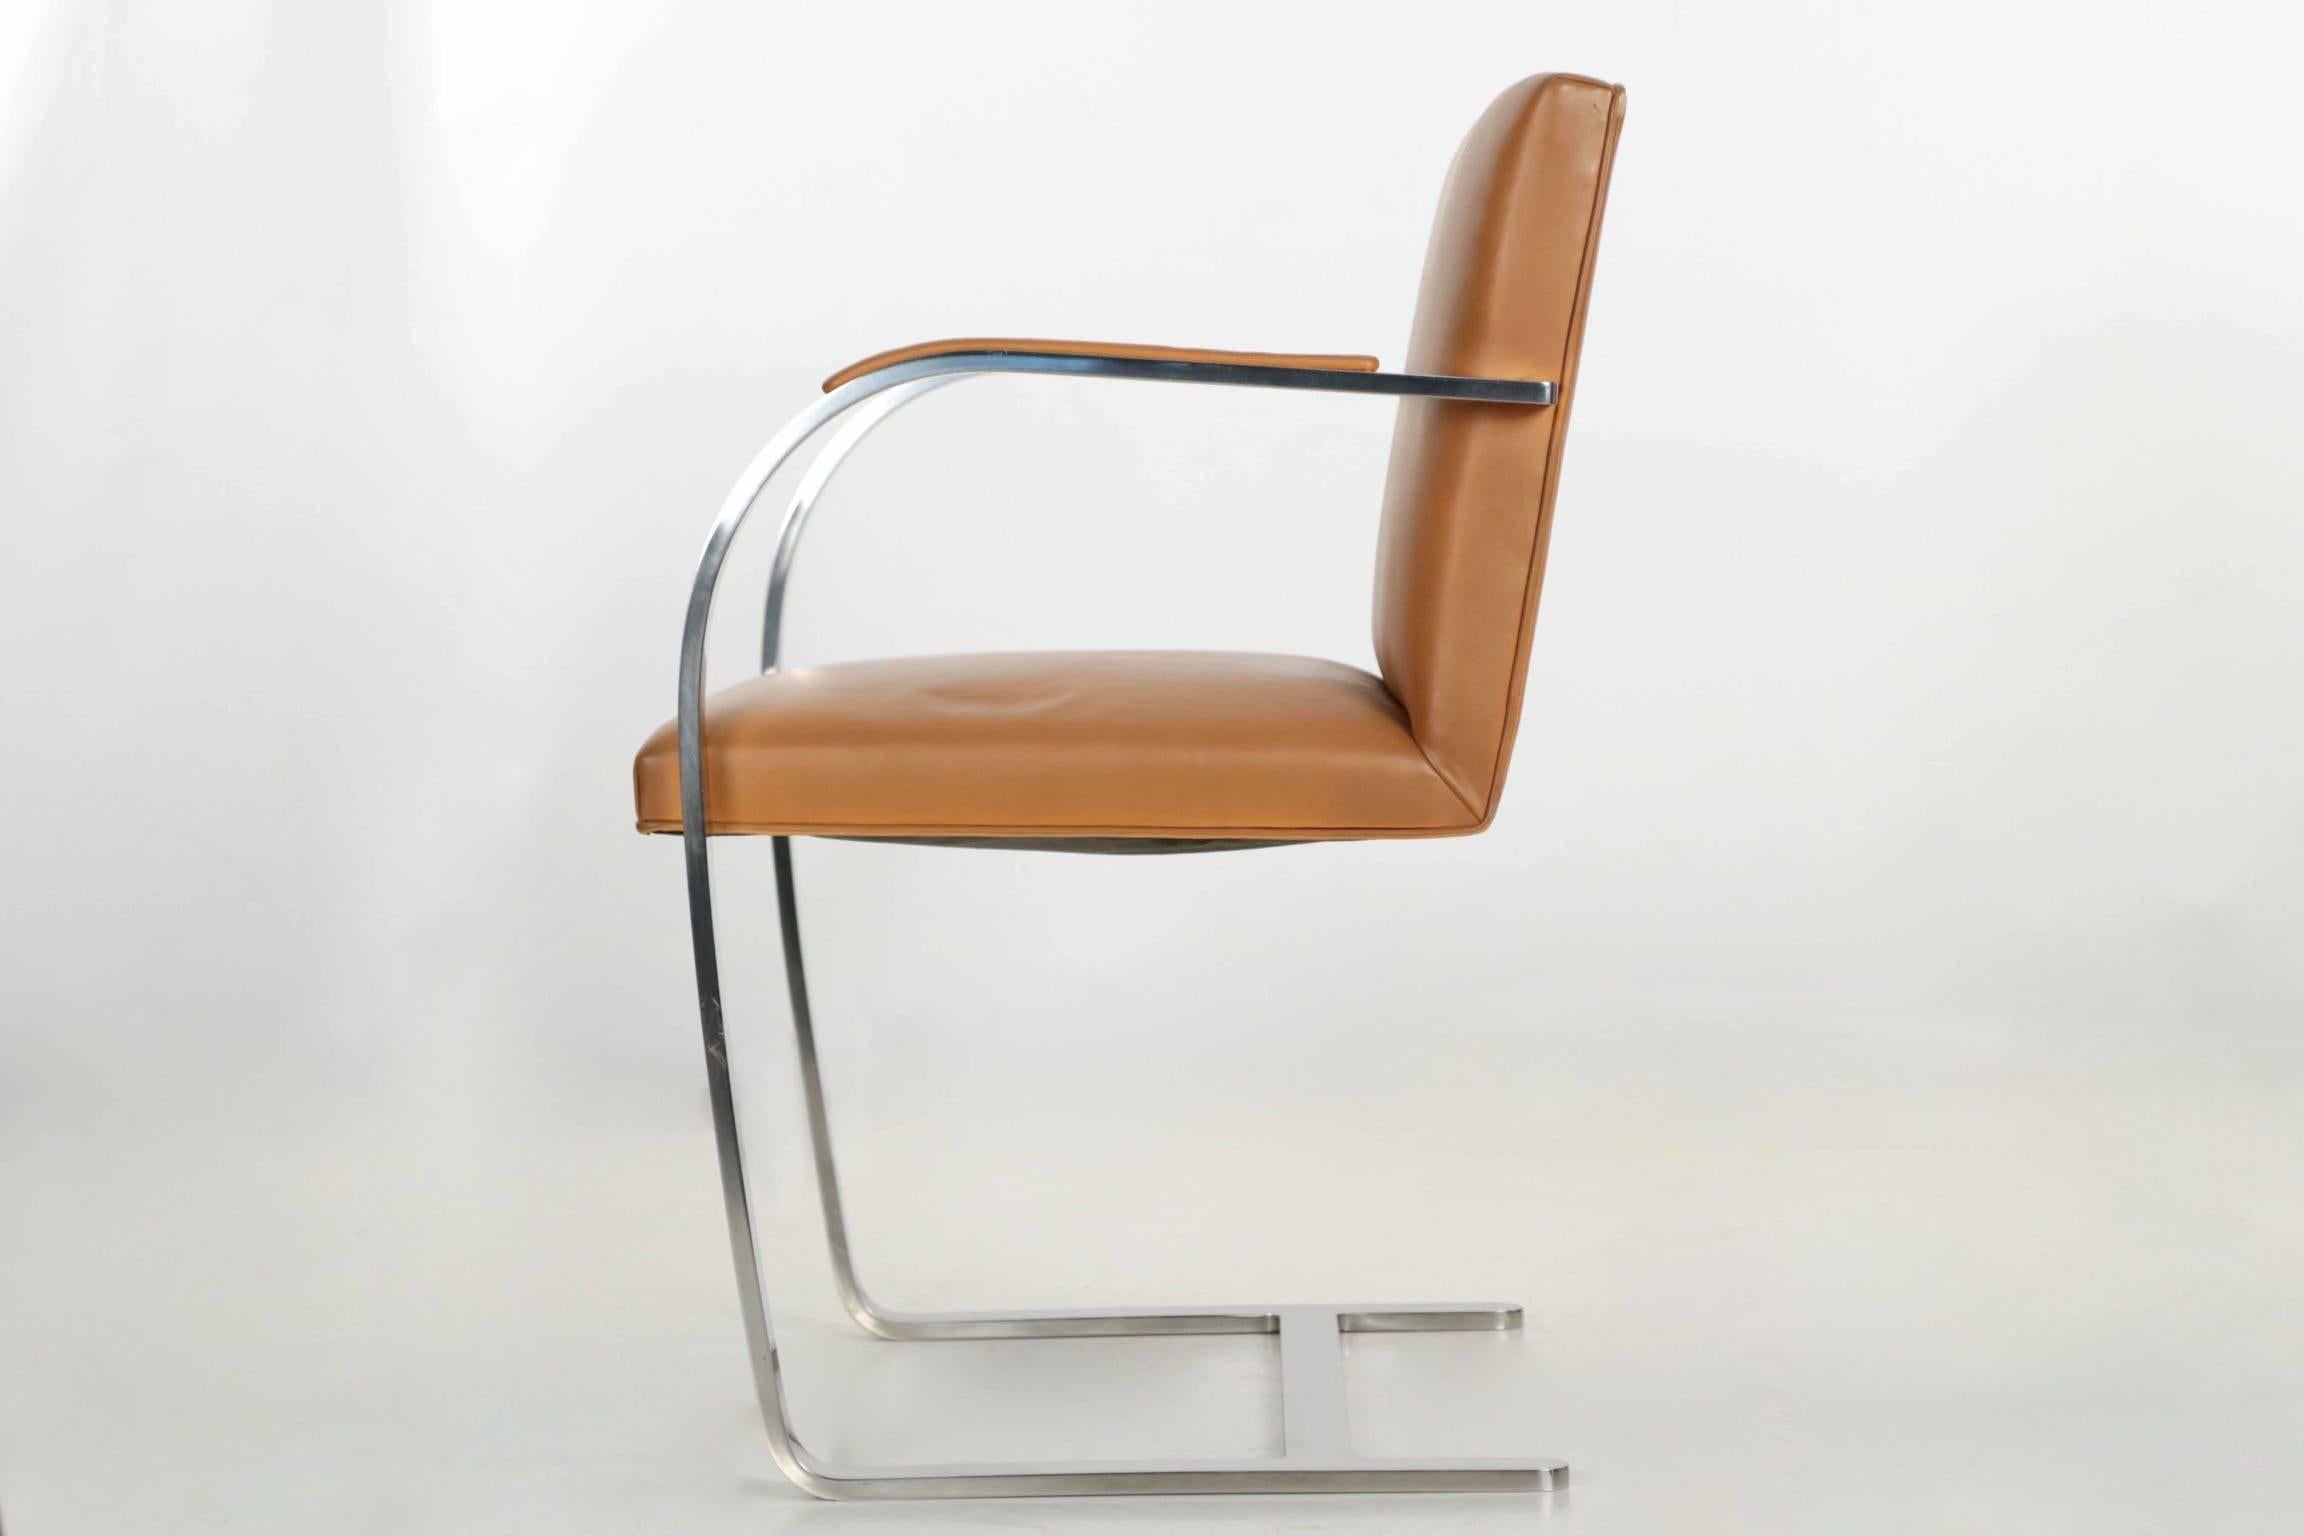 Bauhaus Modern Leather and Steel Brno Lounge Armchair by Mies van der Rohe for Knoll